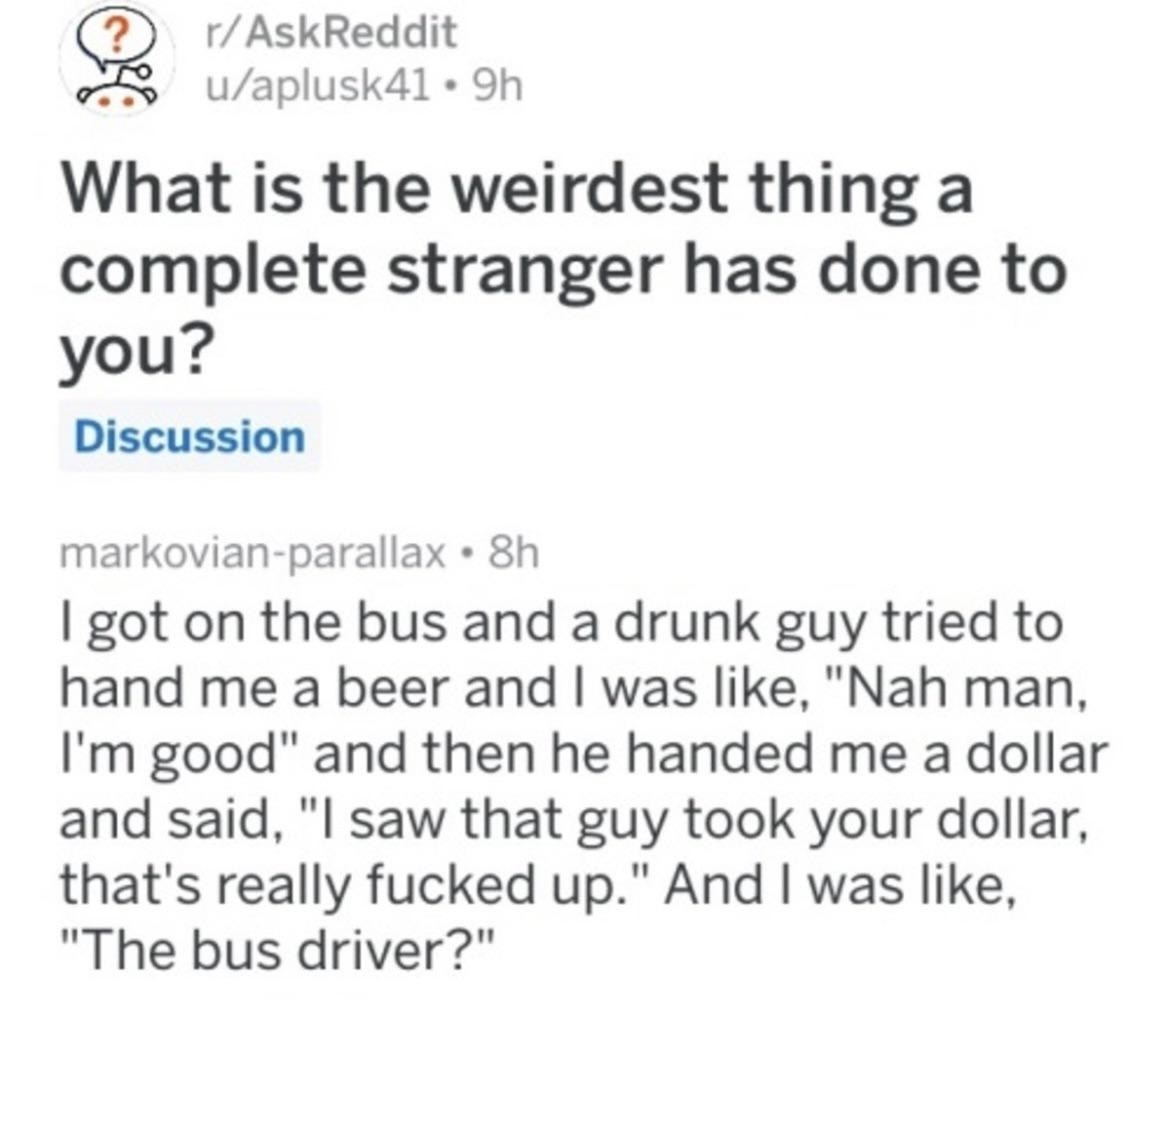 a story of a drunk man behaving strangely yet comically